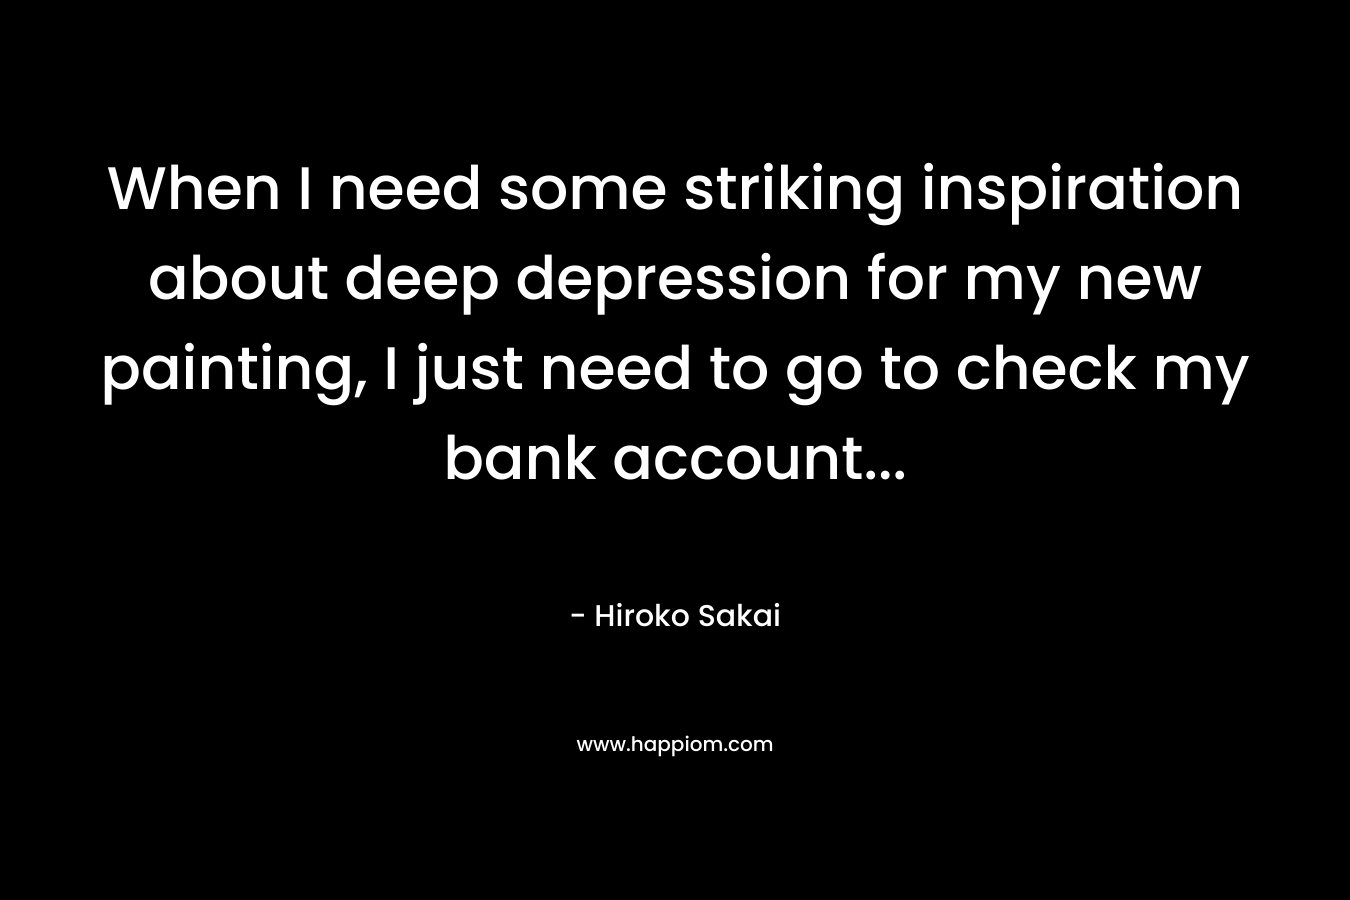 When I need some striking inspiration about deep depression for my new painting, I just need to go to check my bank account...